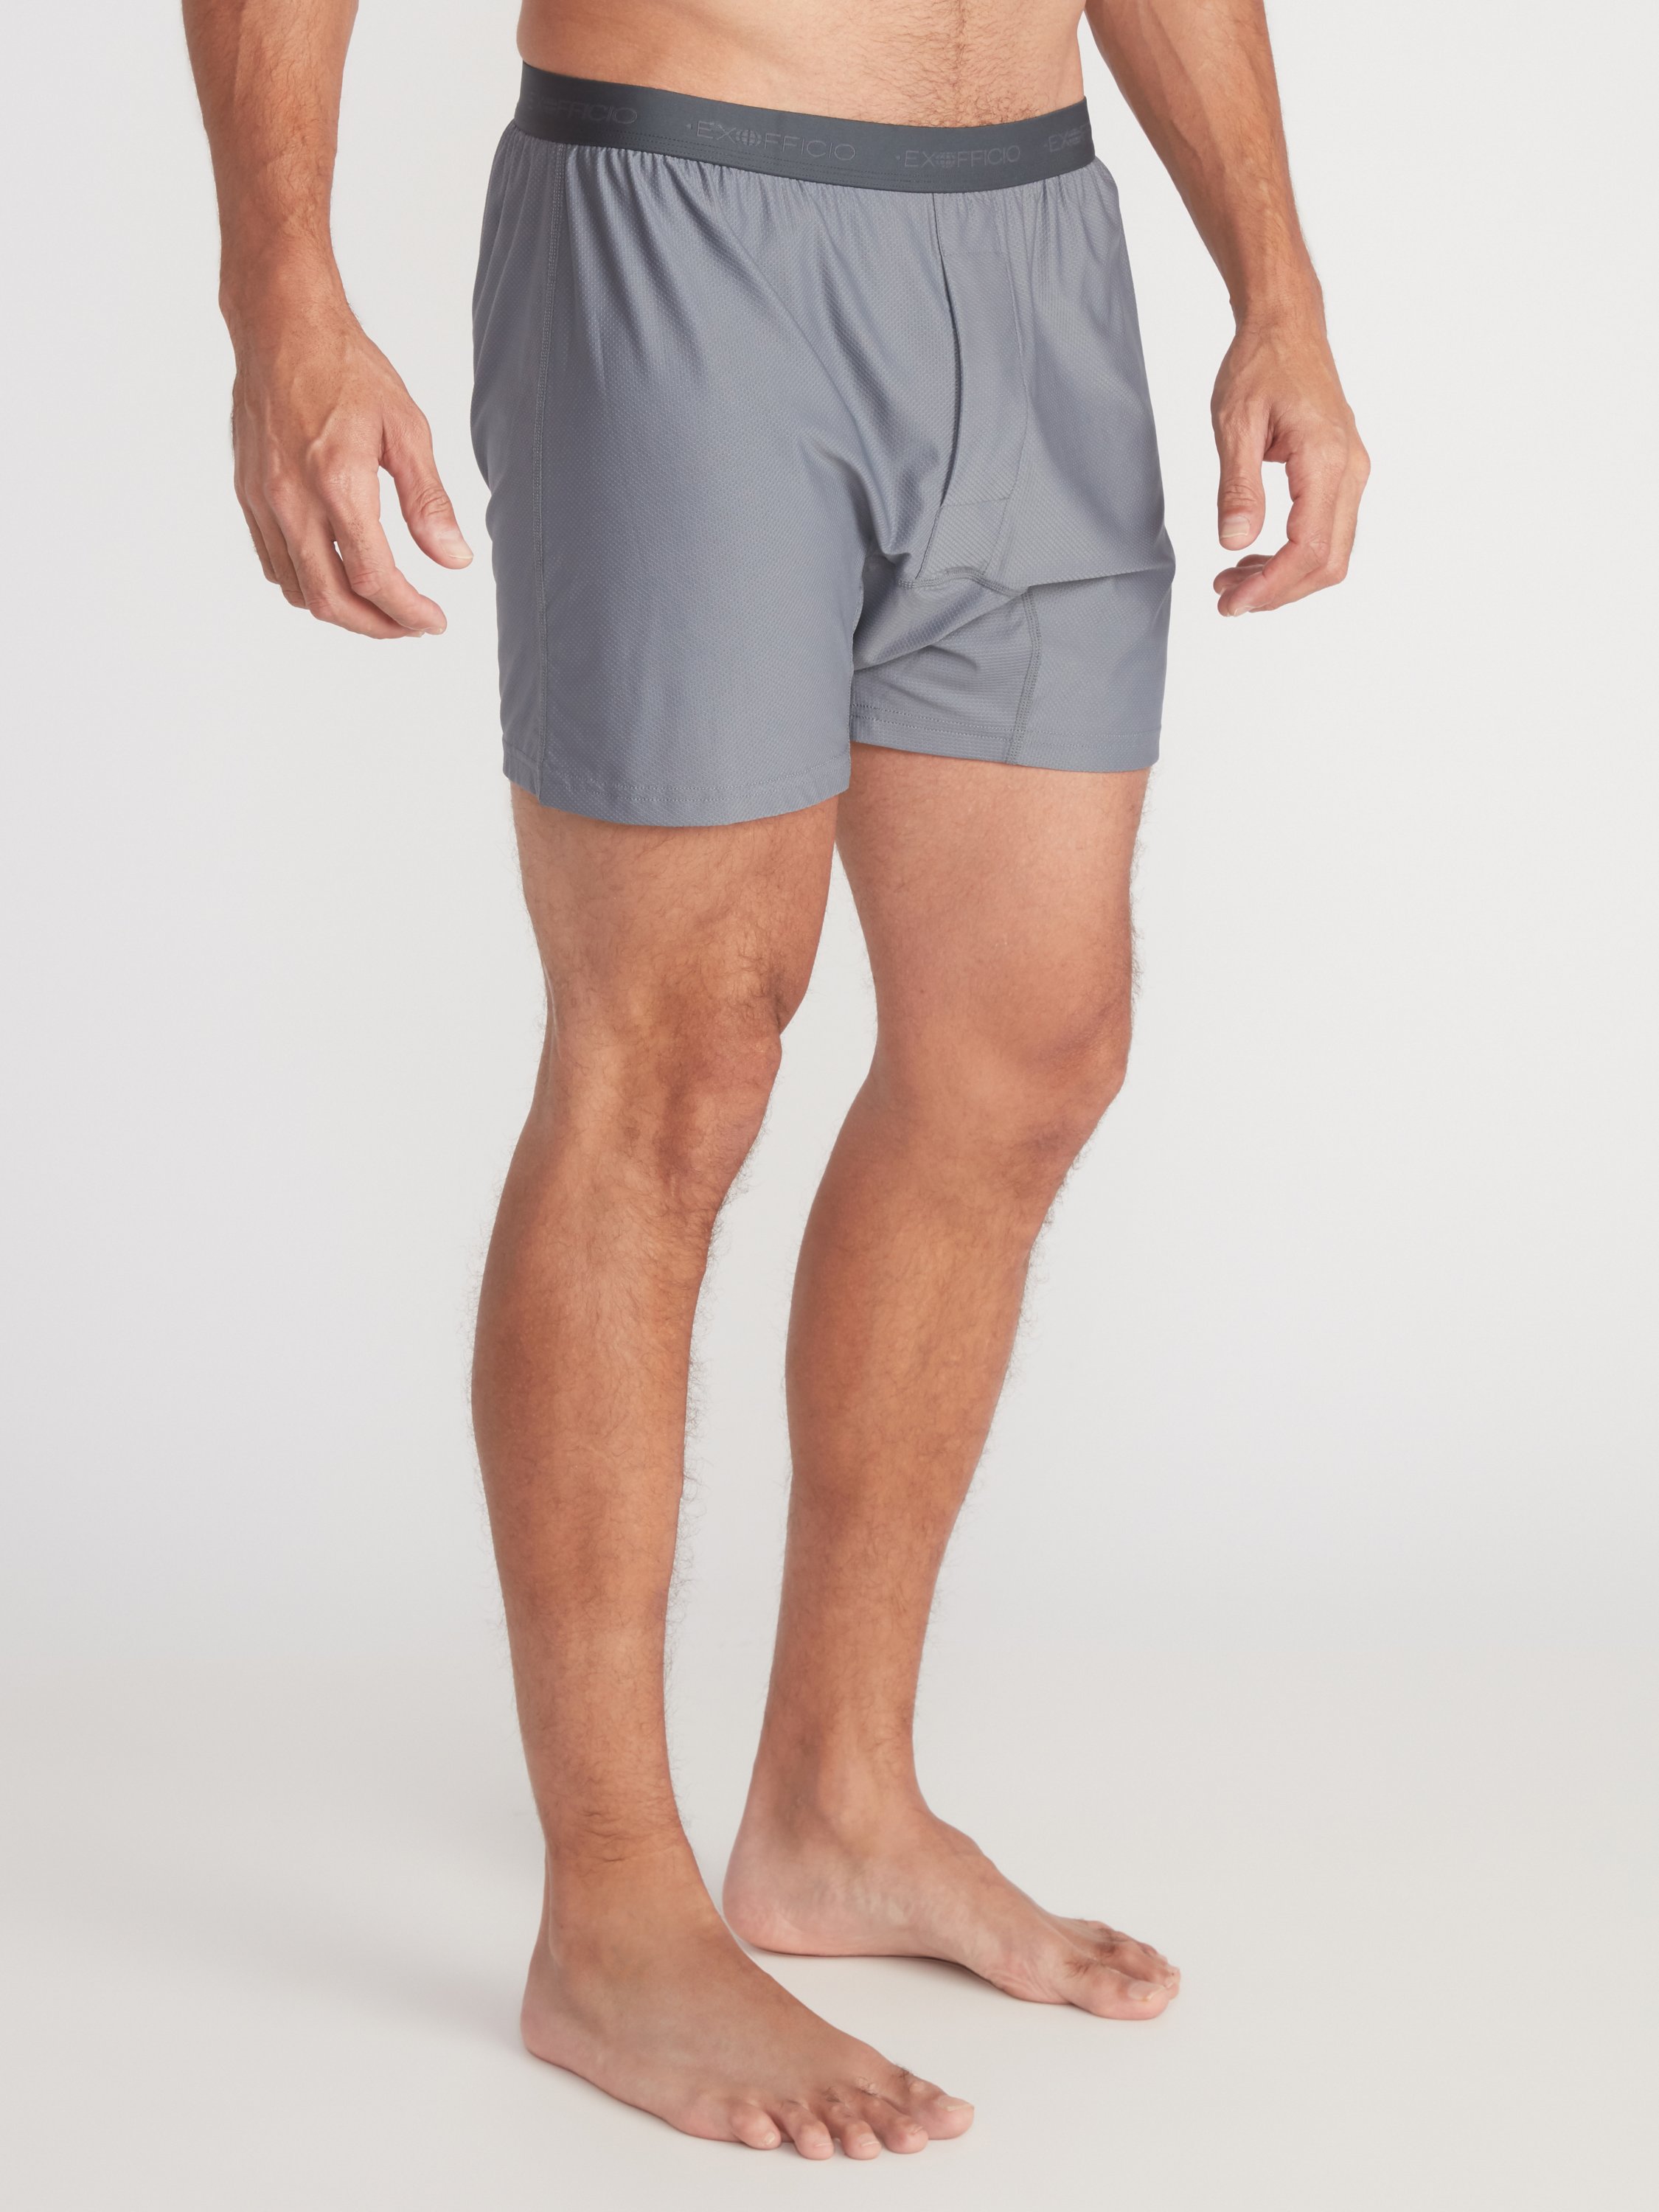 ExOfficio Give-N-Go 2.0 Boxer Brief 2Pk - Men's with Free S&H — CampSaver